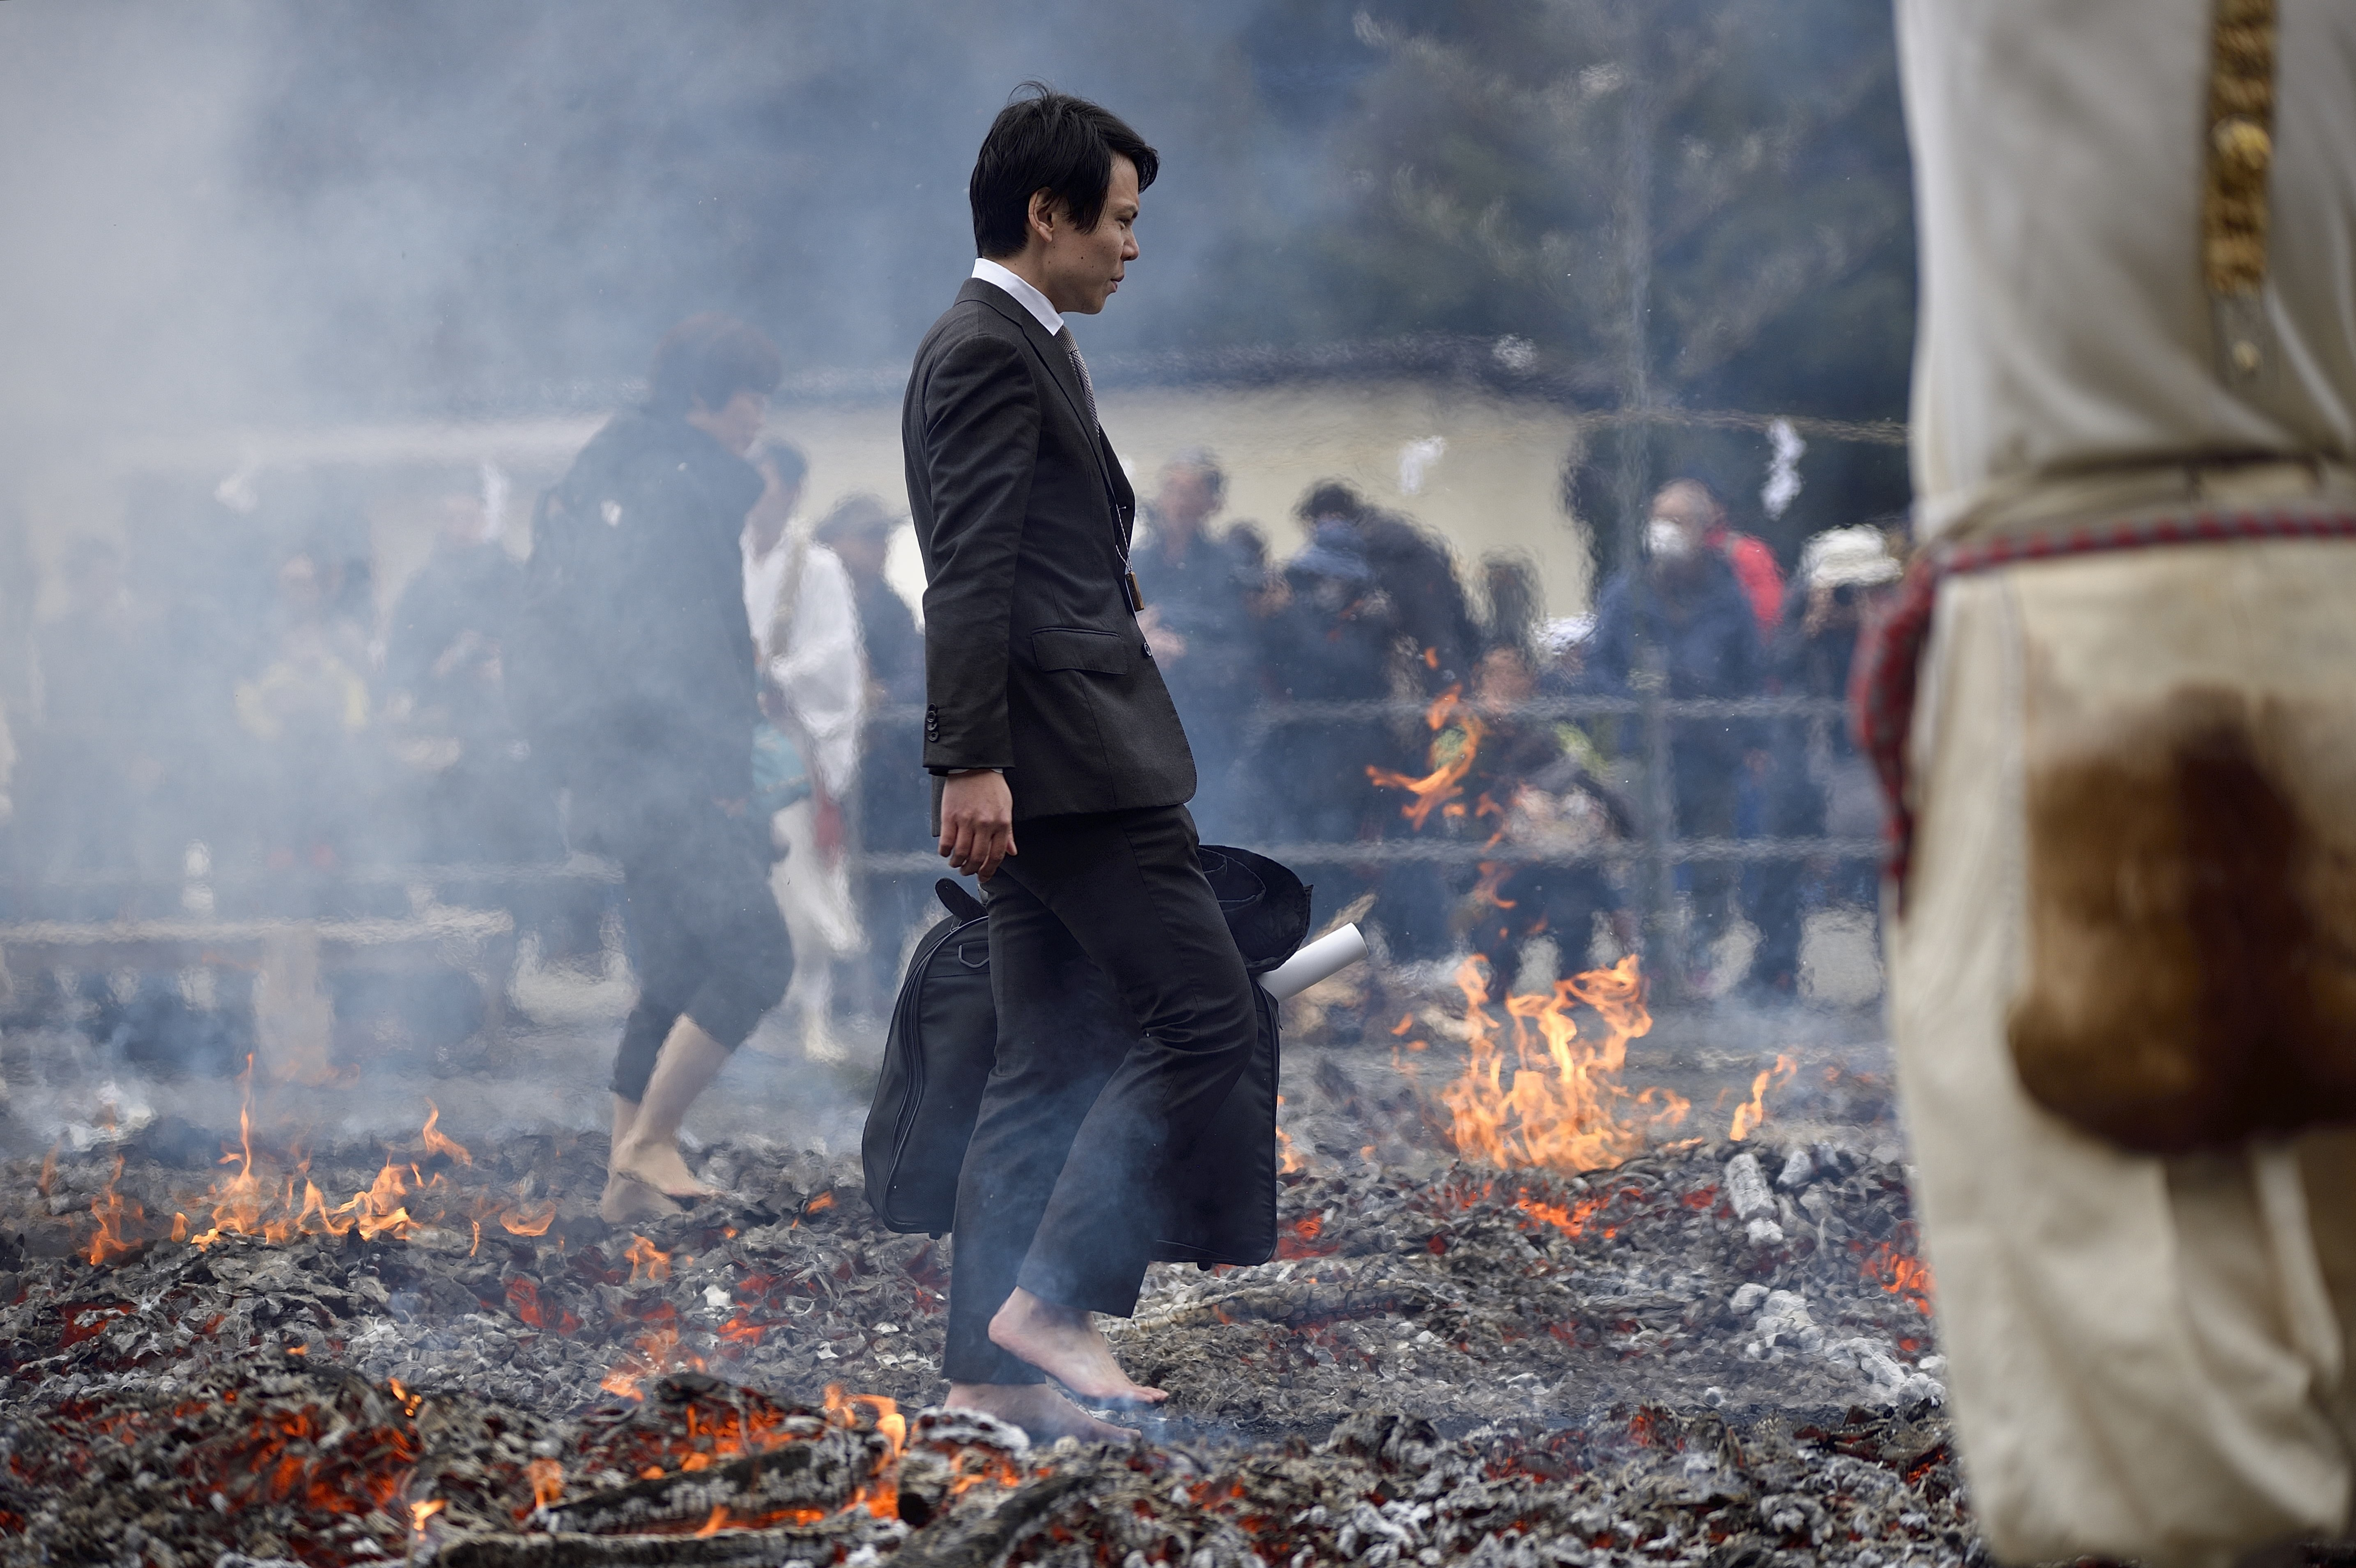 A salaryman walking barefoot over the hot coals, and through flames which purify by burning all defilements away, prays for protection against sickness and calamity and for safety within the family during the Hiwatari fire walking festival in a fire ritual called Saito Goma-ku at Yakuo-in temple in Takaosanguchi in Tokyo, Japan.